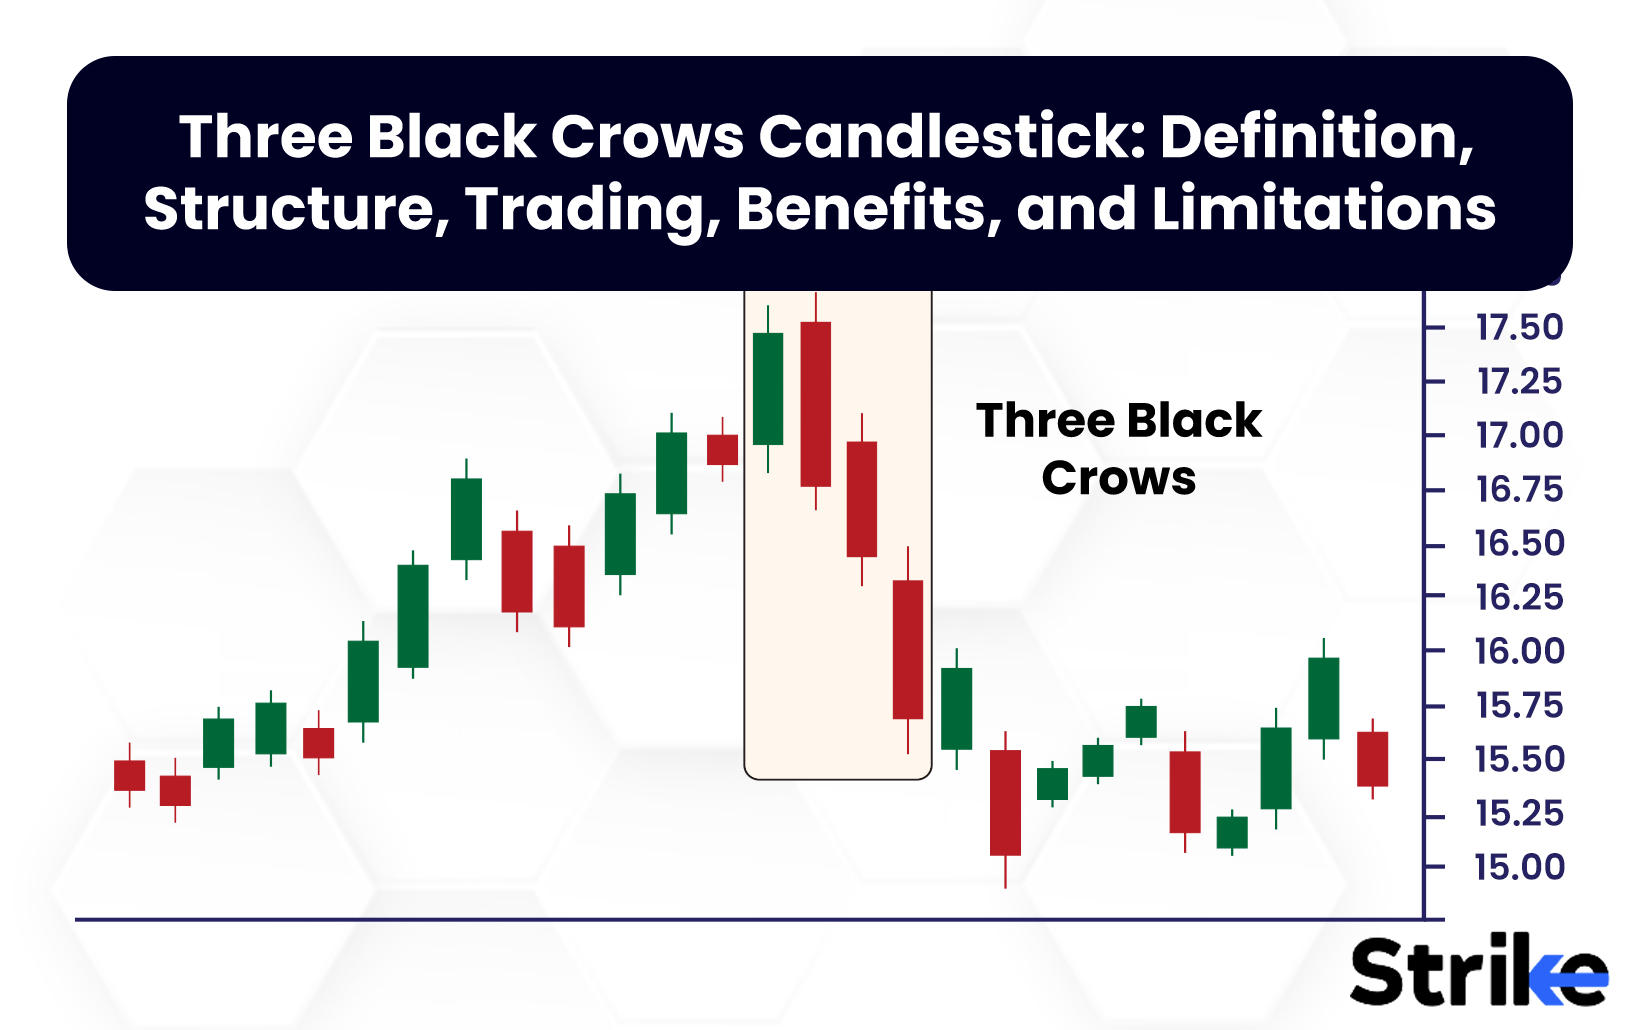 Three Black Crows Candlestick: Definition, Structure, Trading, Benefits, and Limitations